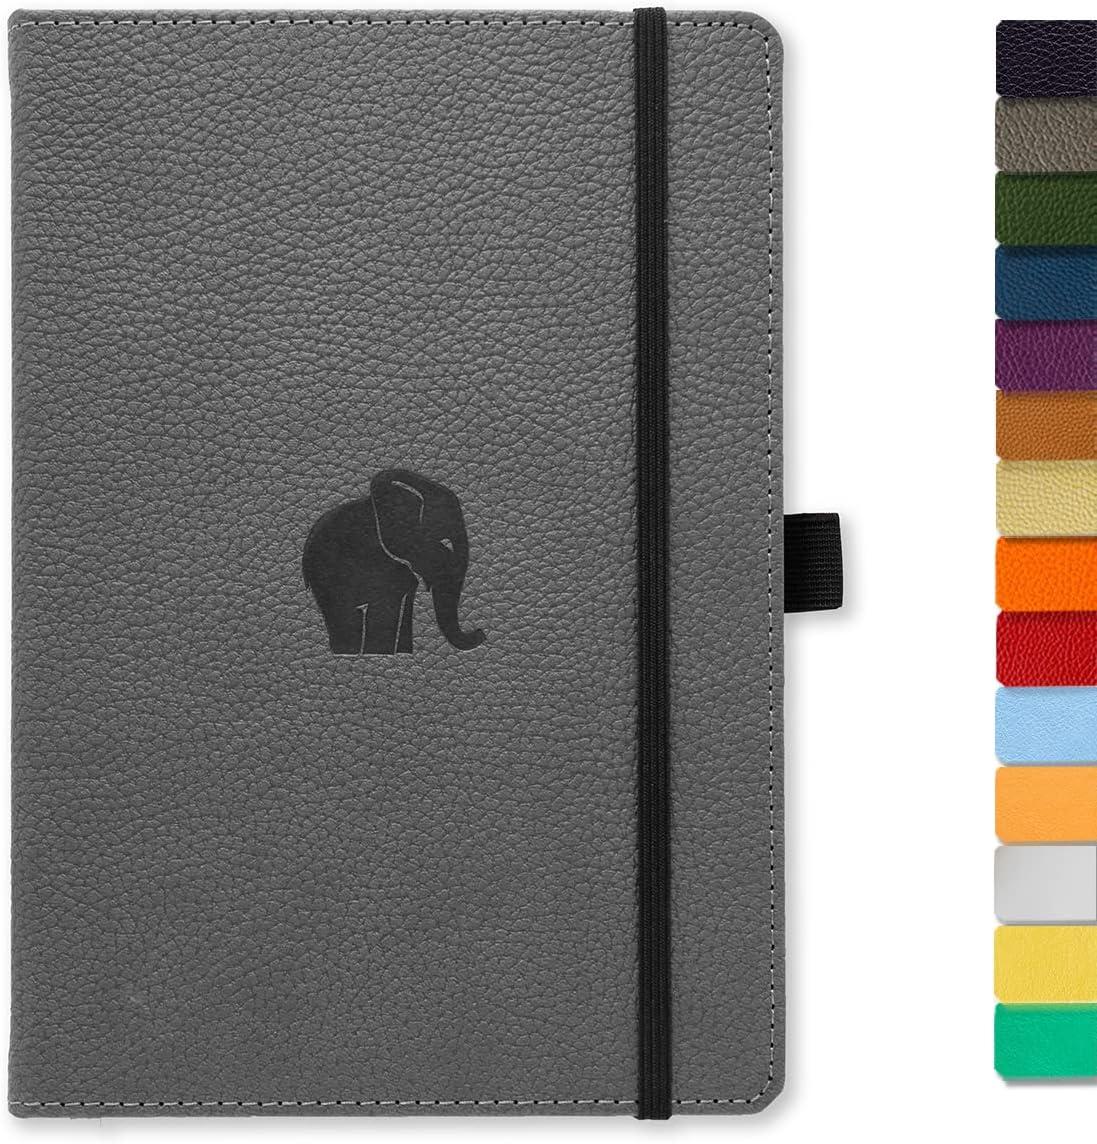 Dingbats A5 Wildlife Notebook Journal Hardcover Cream 100gsm Ink-Proof Paper 6 1 X 8 5 Inches 192 Pages Gray Elephant Lined